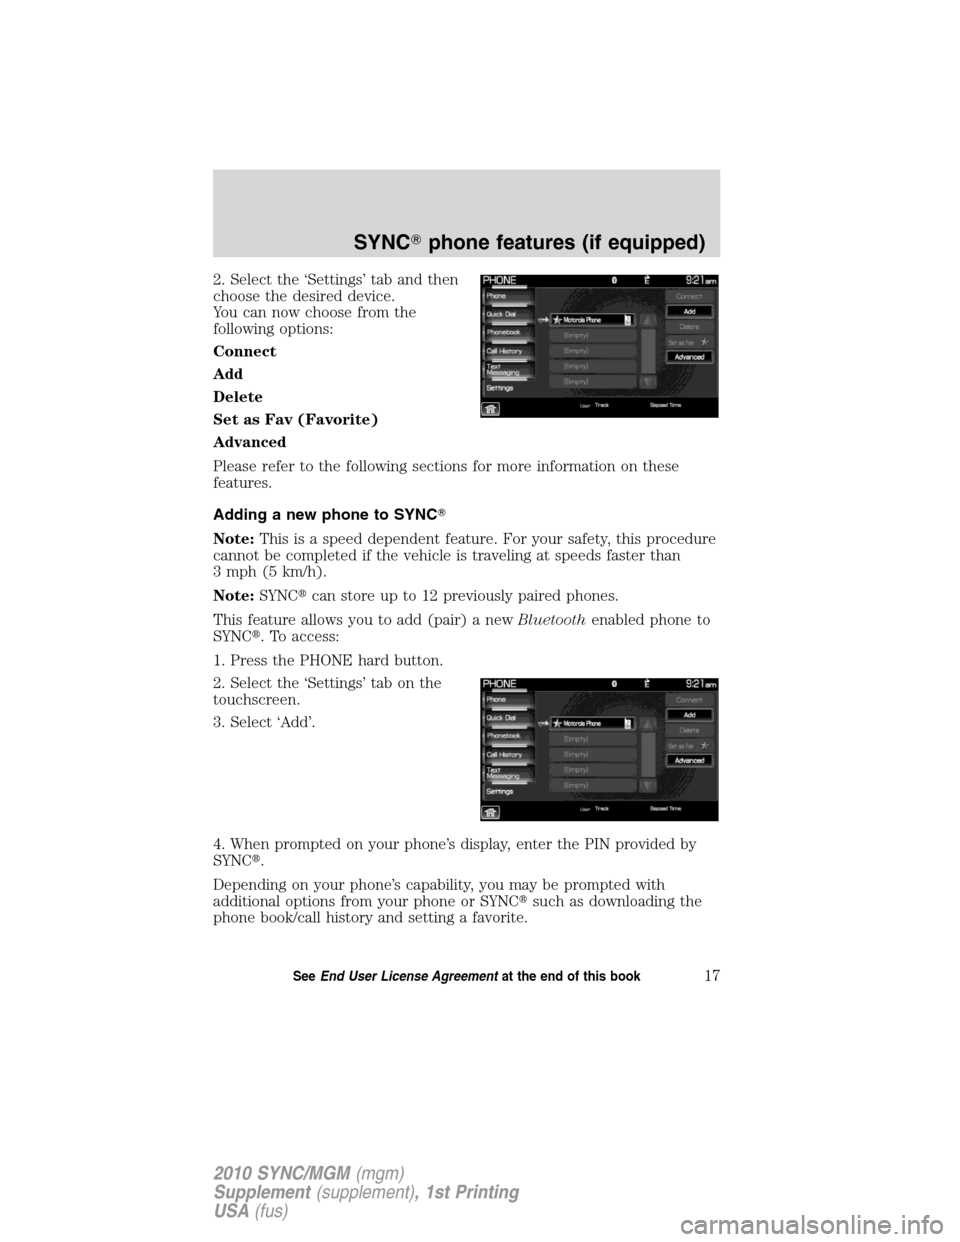 LINCOLN MKT 2010  SYNC Supplement Manual 2. Select the ‘Settings’ tab and then
choose the desired device.
You can now choose from the
following options:
Connect
Add
Delete
Set as Fav (Favorite)
Advanced
Please refer to the following sect